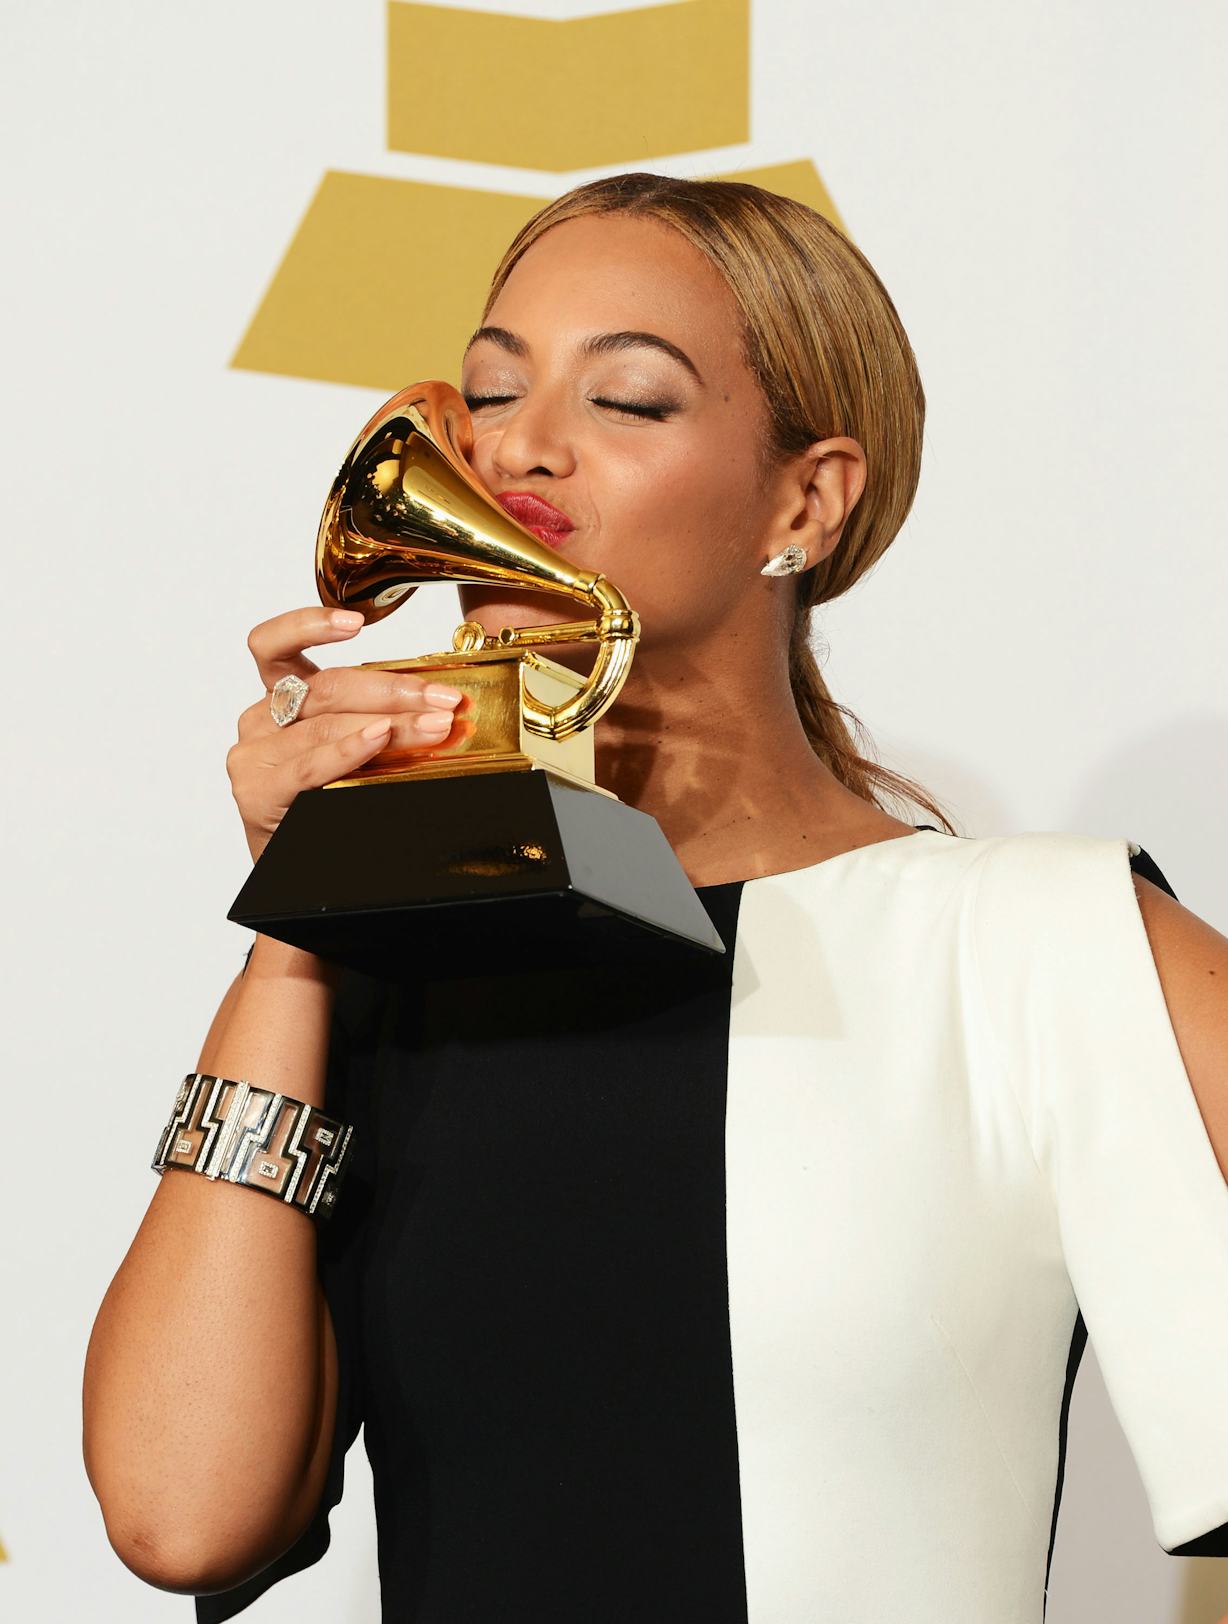 What Female Artists Hold the Most Grammy Nominations? Beyonce Leads the Pack